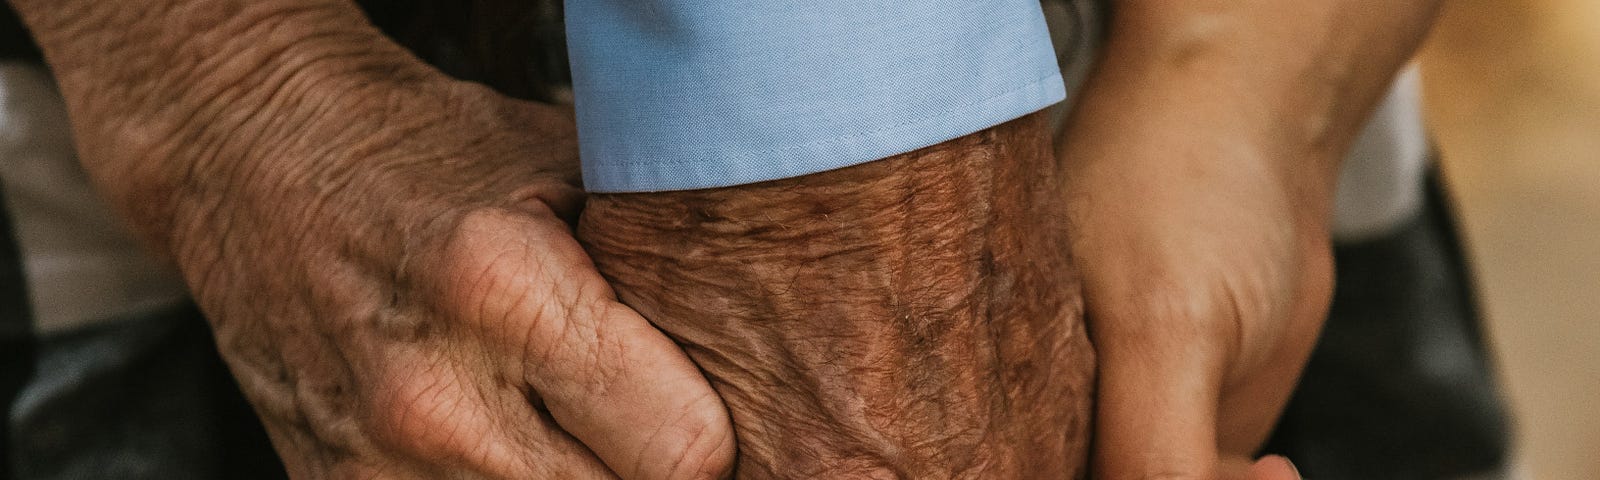 Photo shows hands of different sizes holding onto the fingers of an older man.